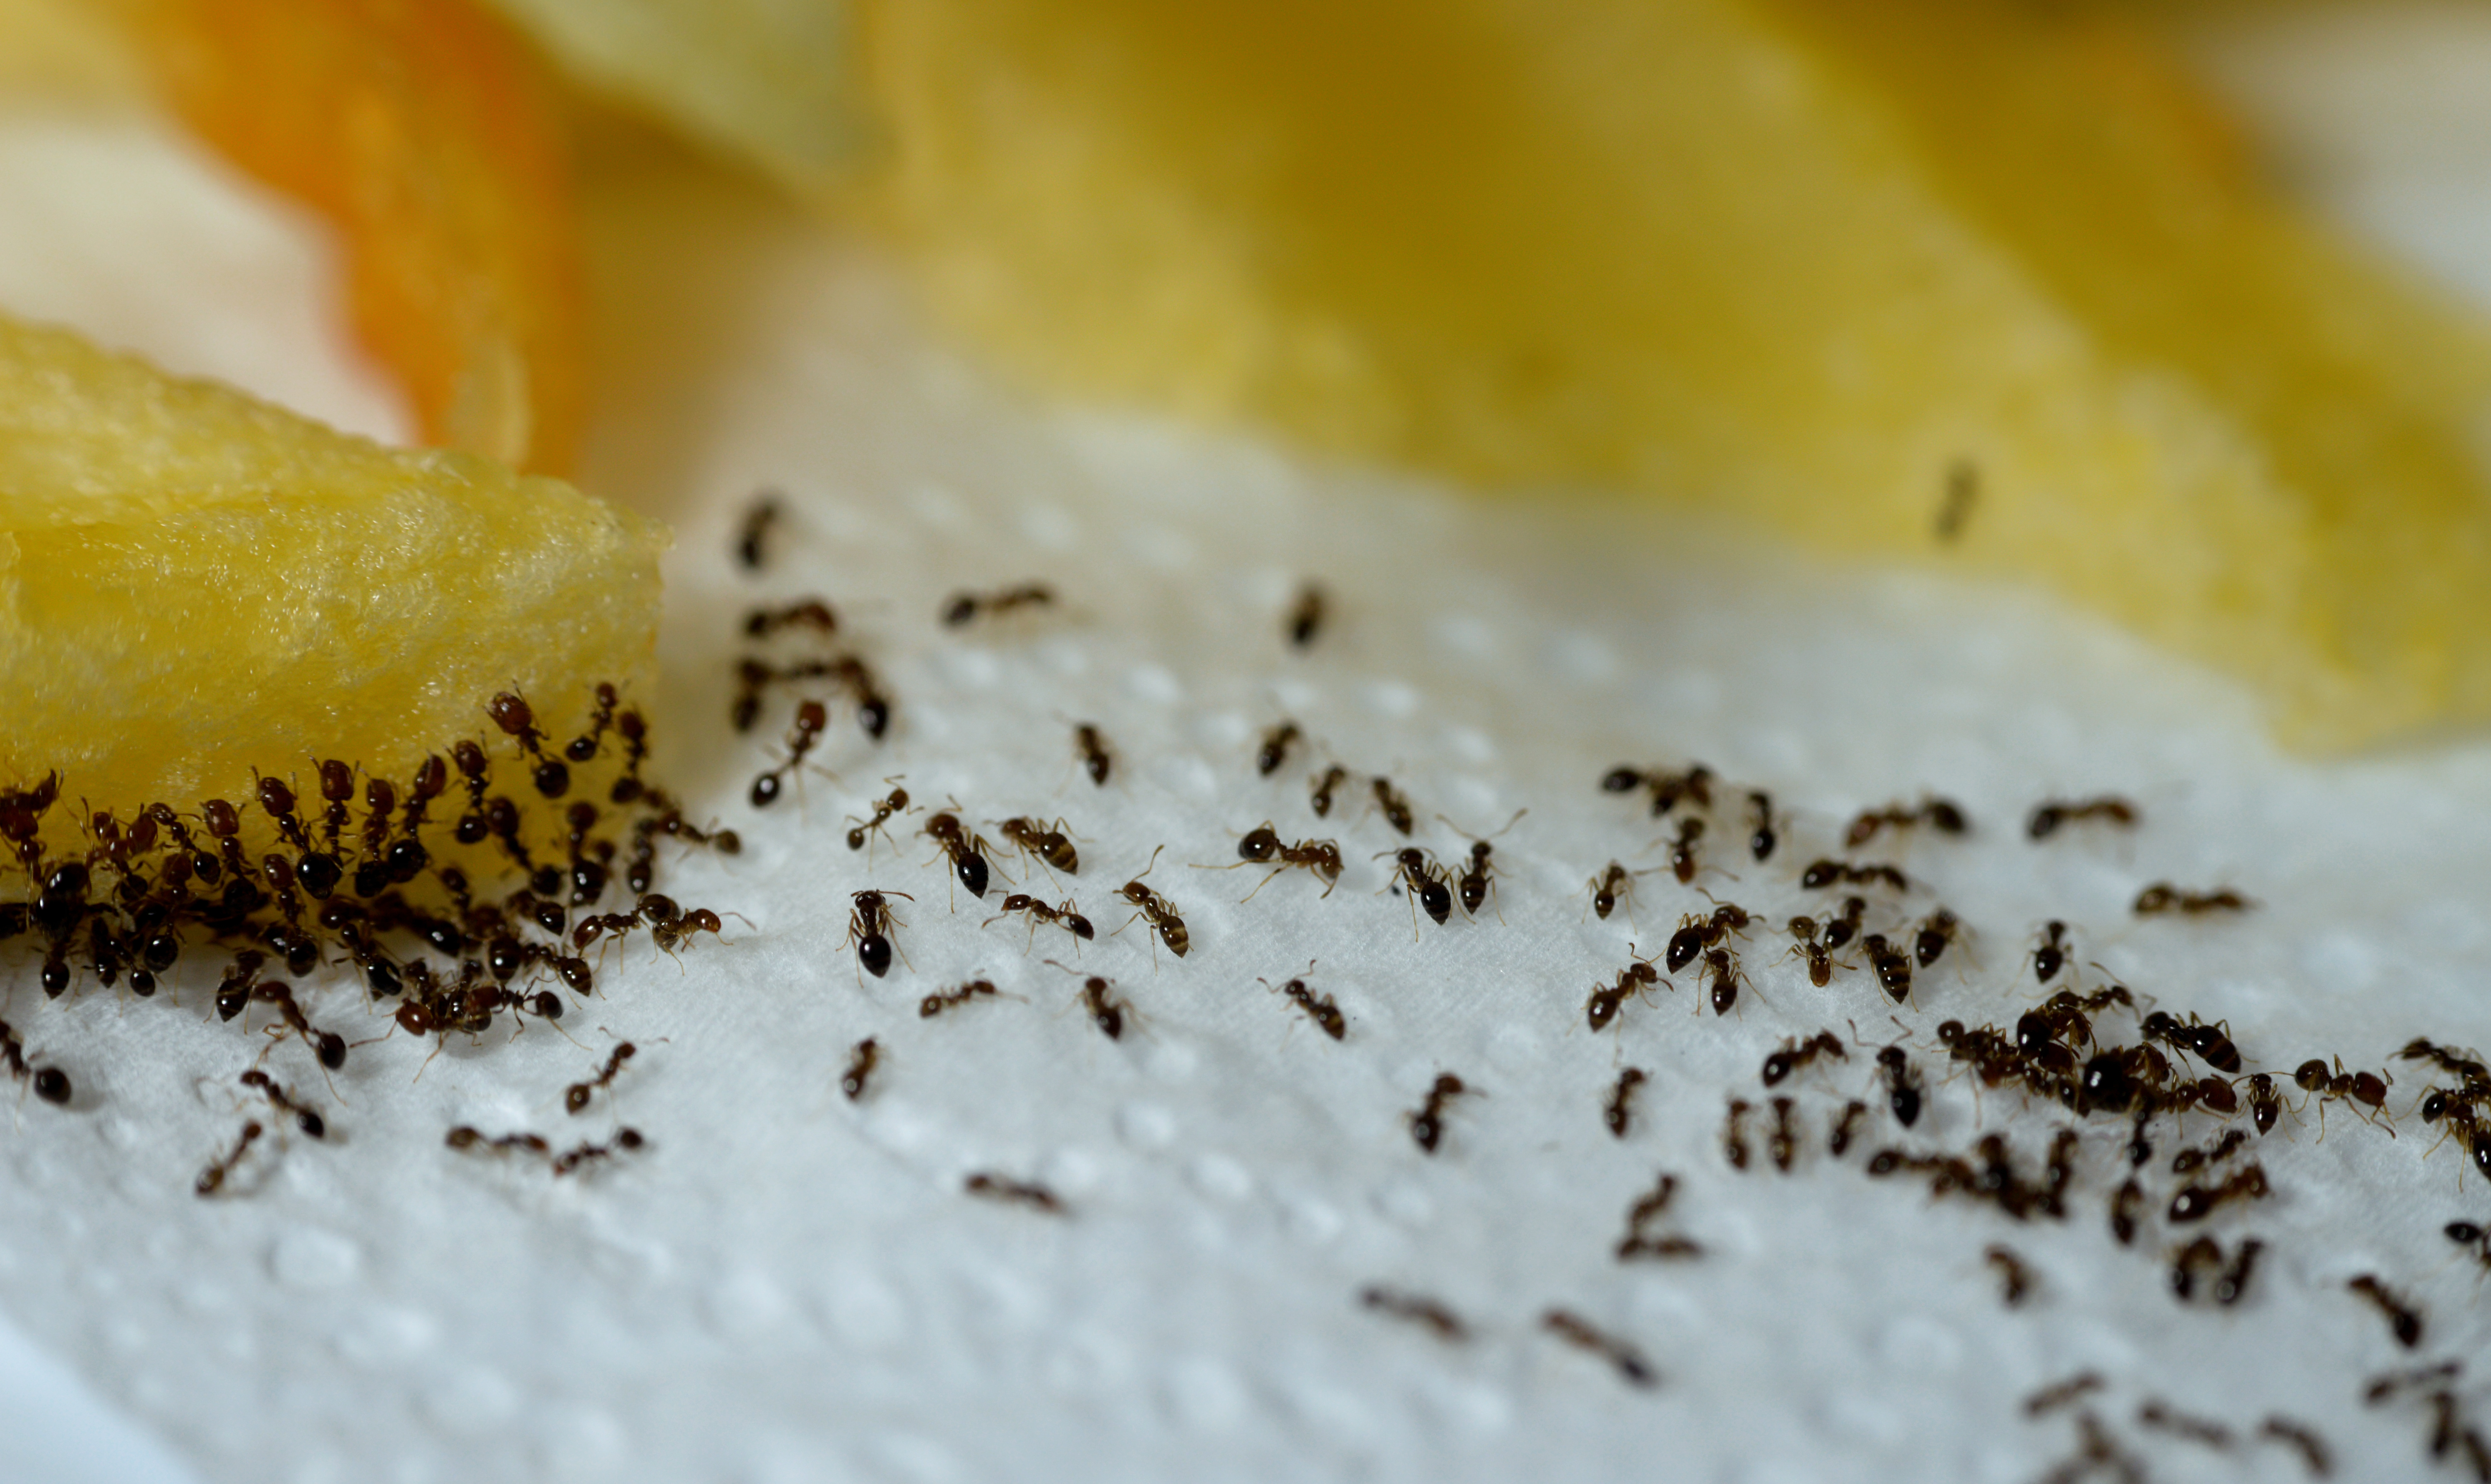 An image of little black ants swarming food - learn how GGA Pest Management can help you control little black ant infestations in Killeen, TX.